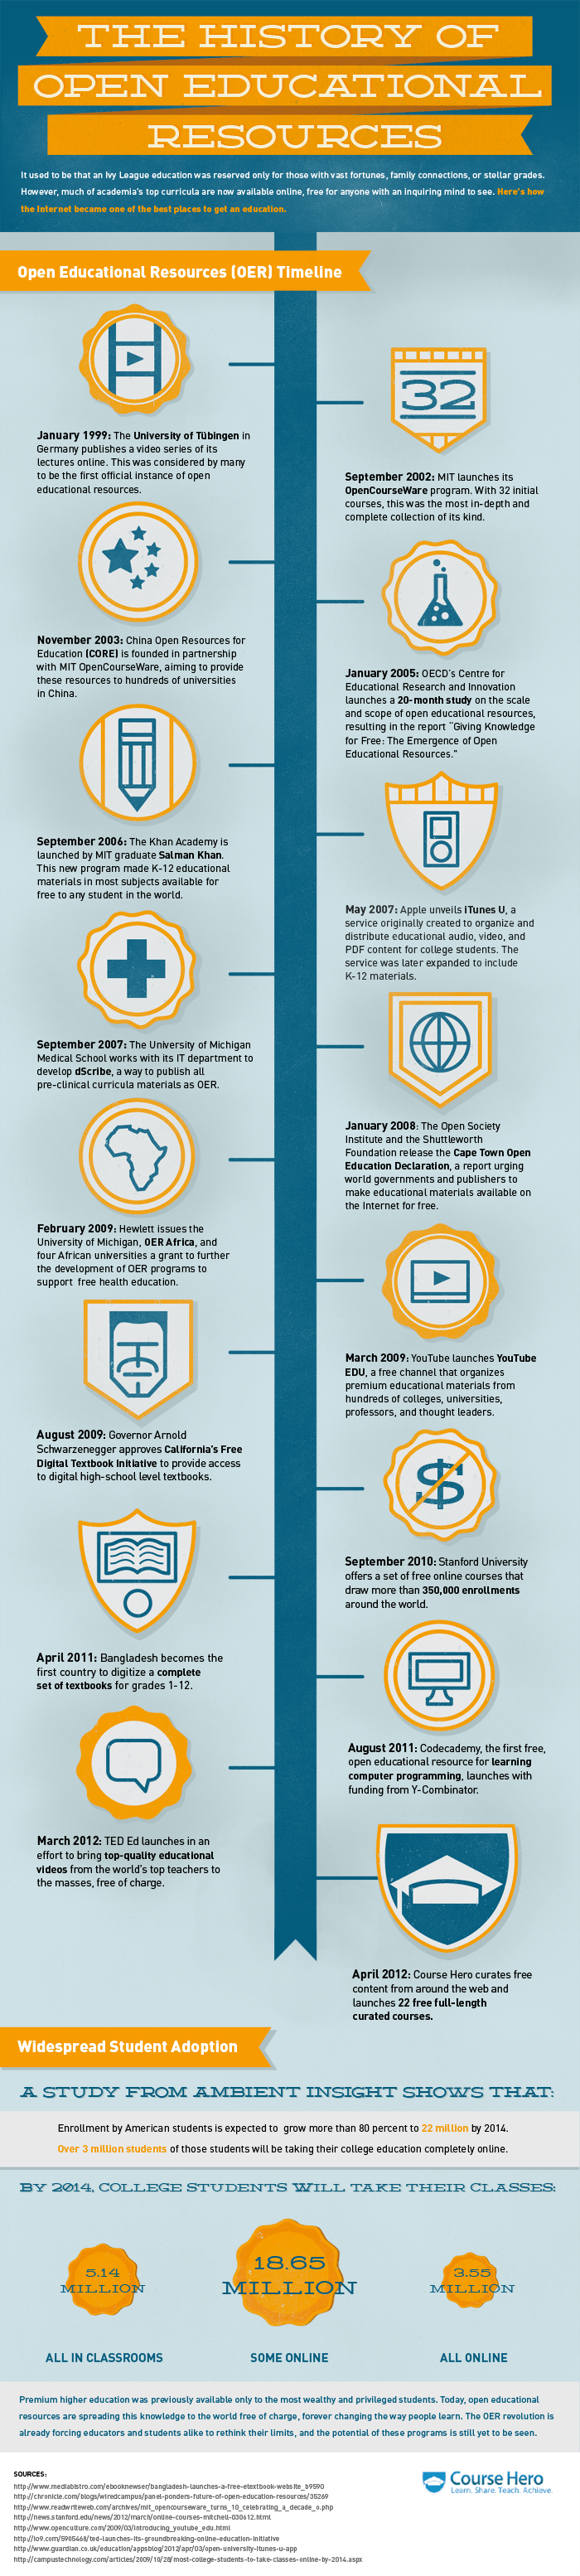 The History of Open Educational Resources Infographic